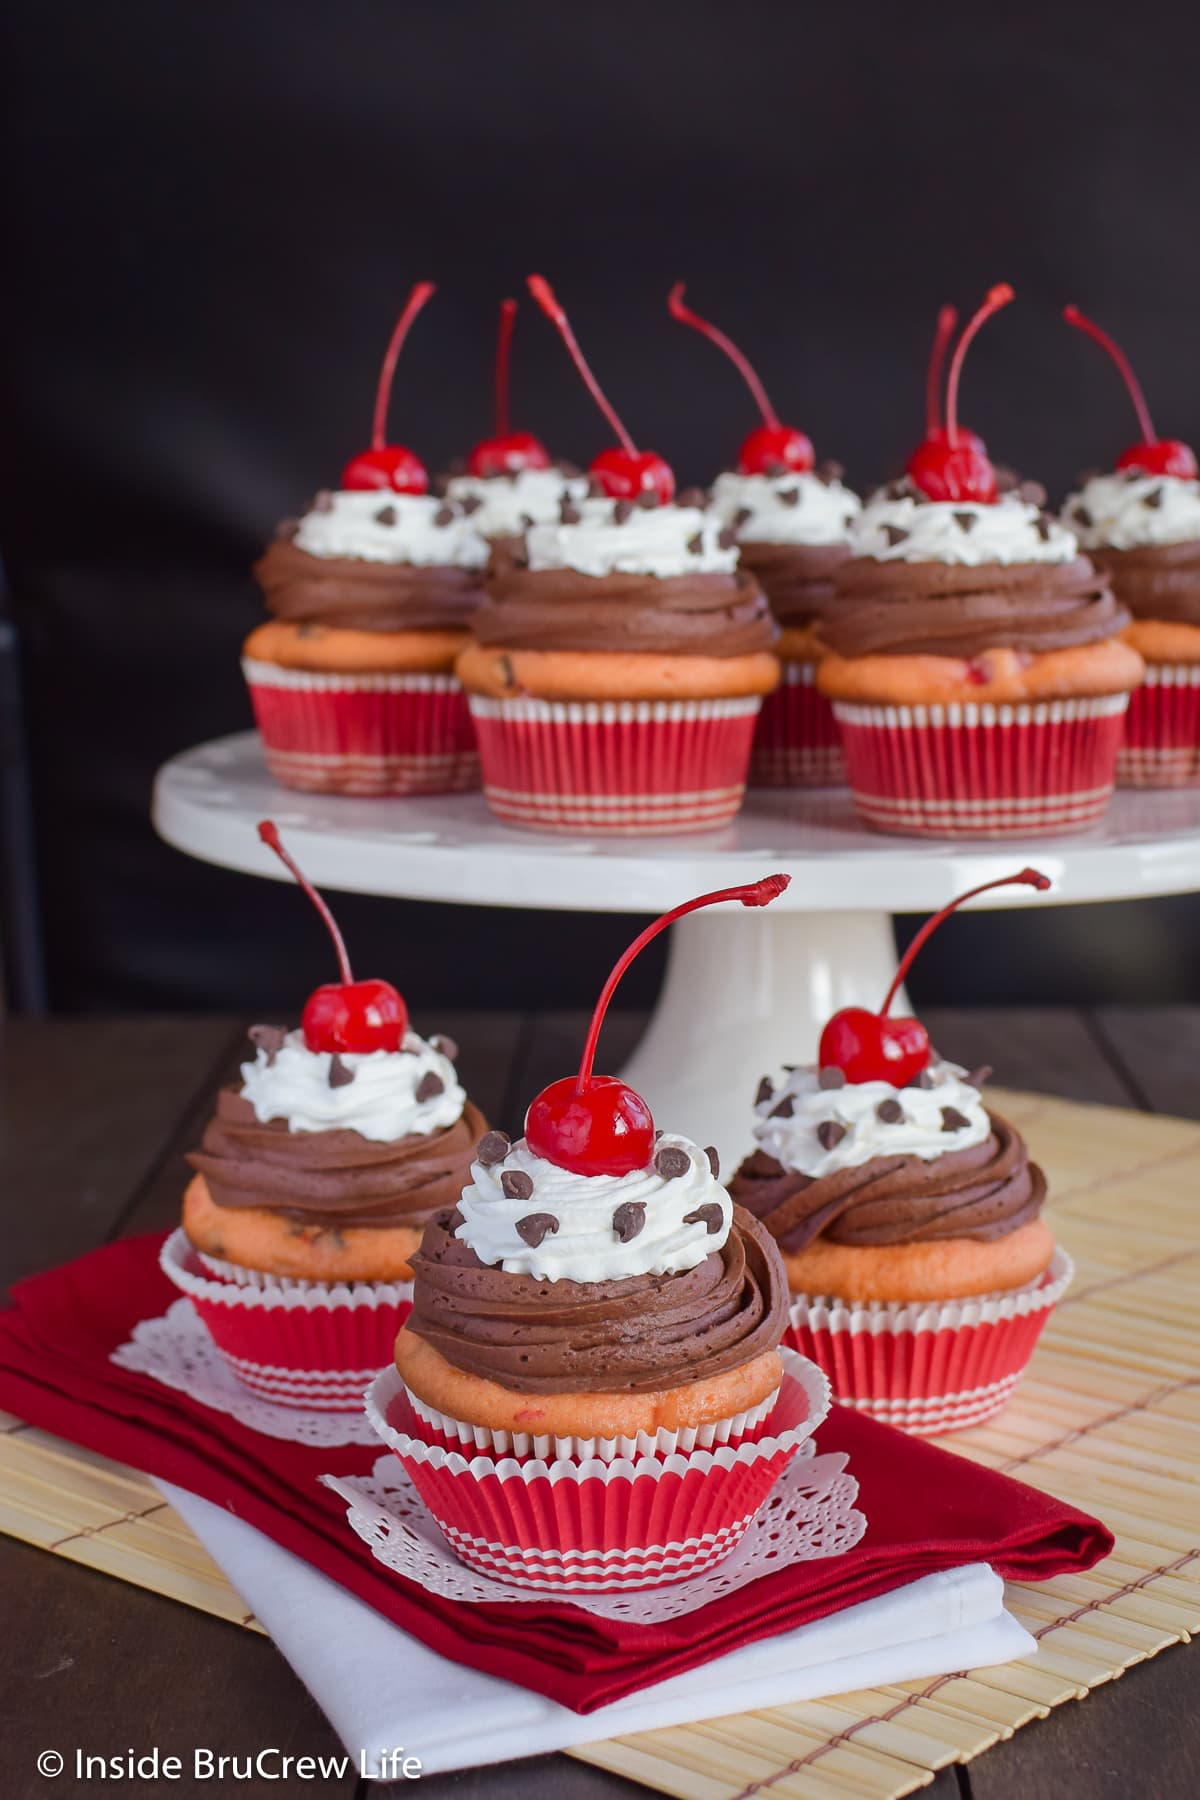 Frosted cupcakes topped with a cherry on a cake plate.